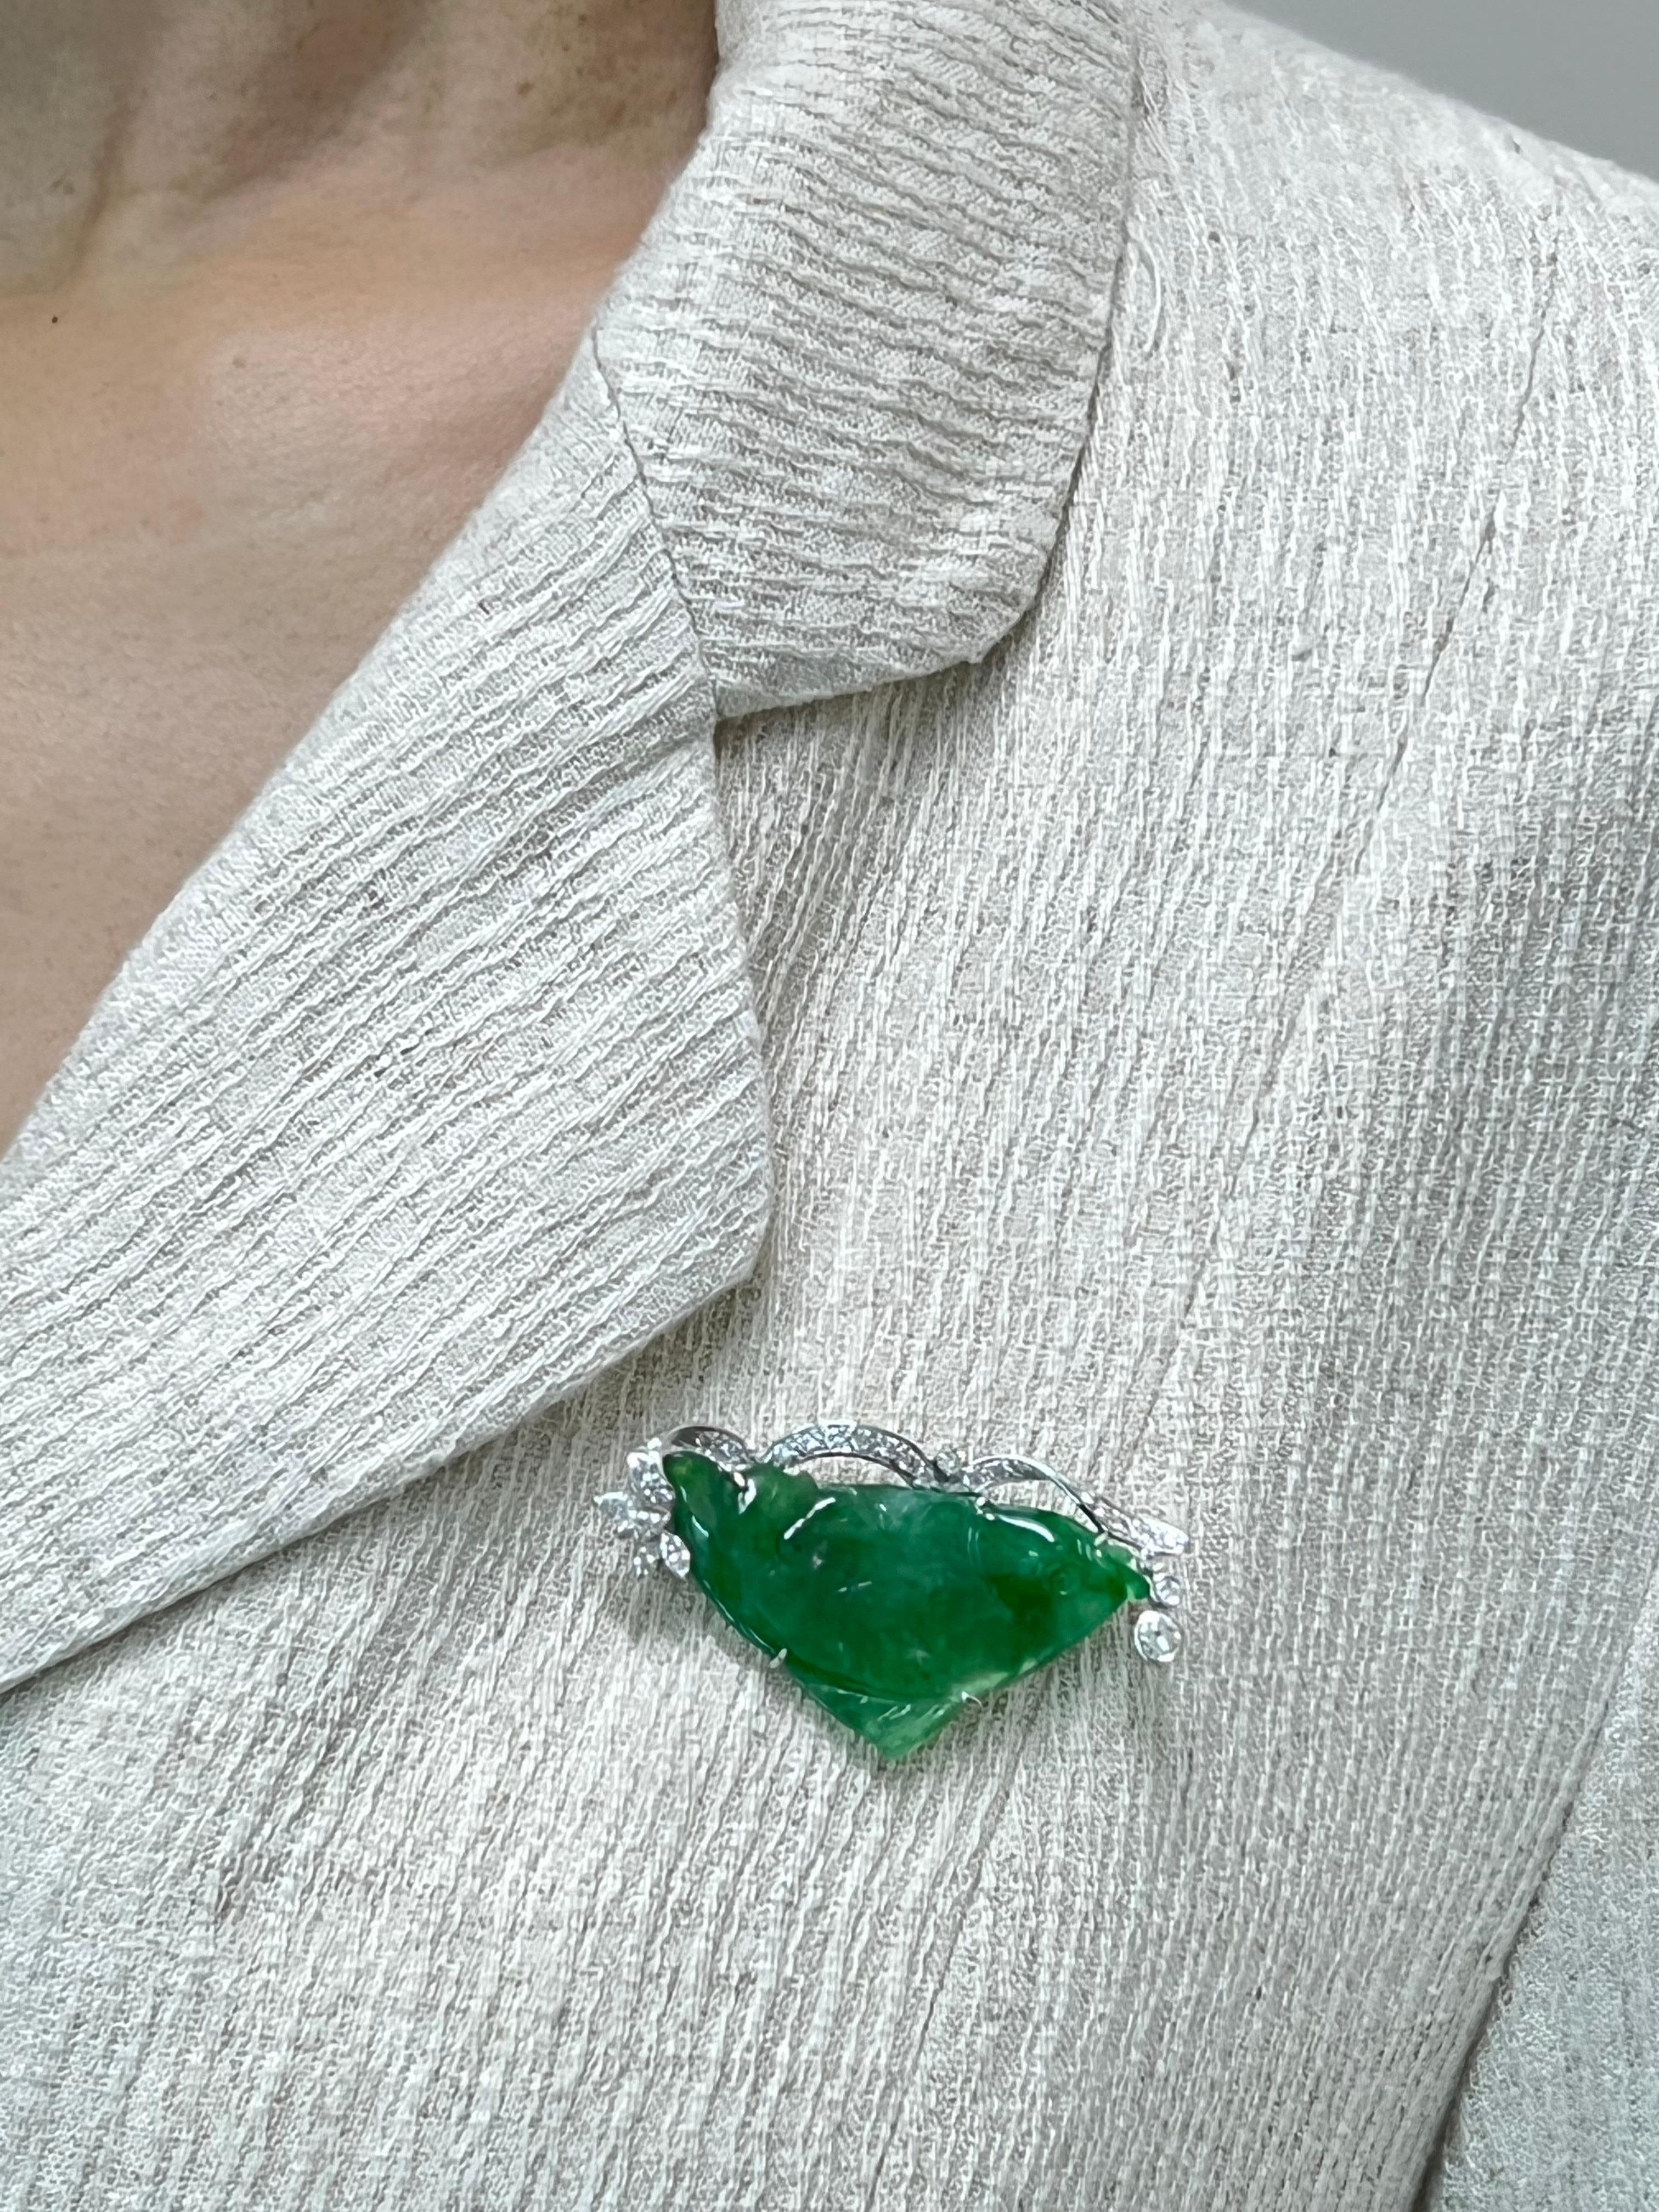 Please check out the HD video. This apple green jadeite jade brooch is large in surface area! This is certified to be natural jadeite jade. The brooch is set in 18k white gold. There is one large carved fish green jade and 4 marquise white diamonds